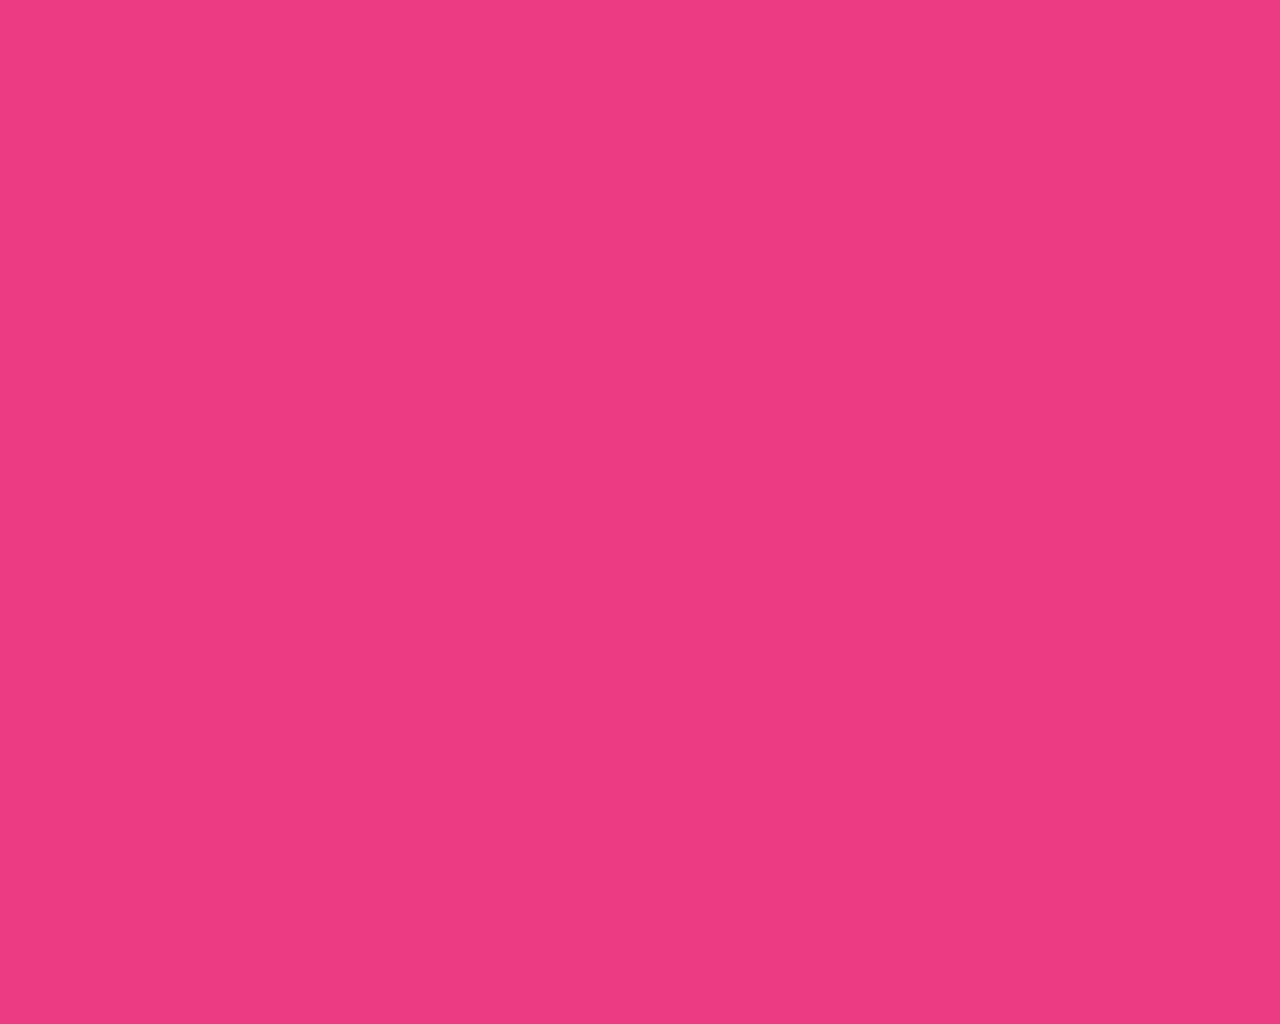 Plain Color Pink Background Image Pictures Becuo